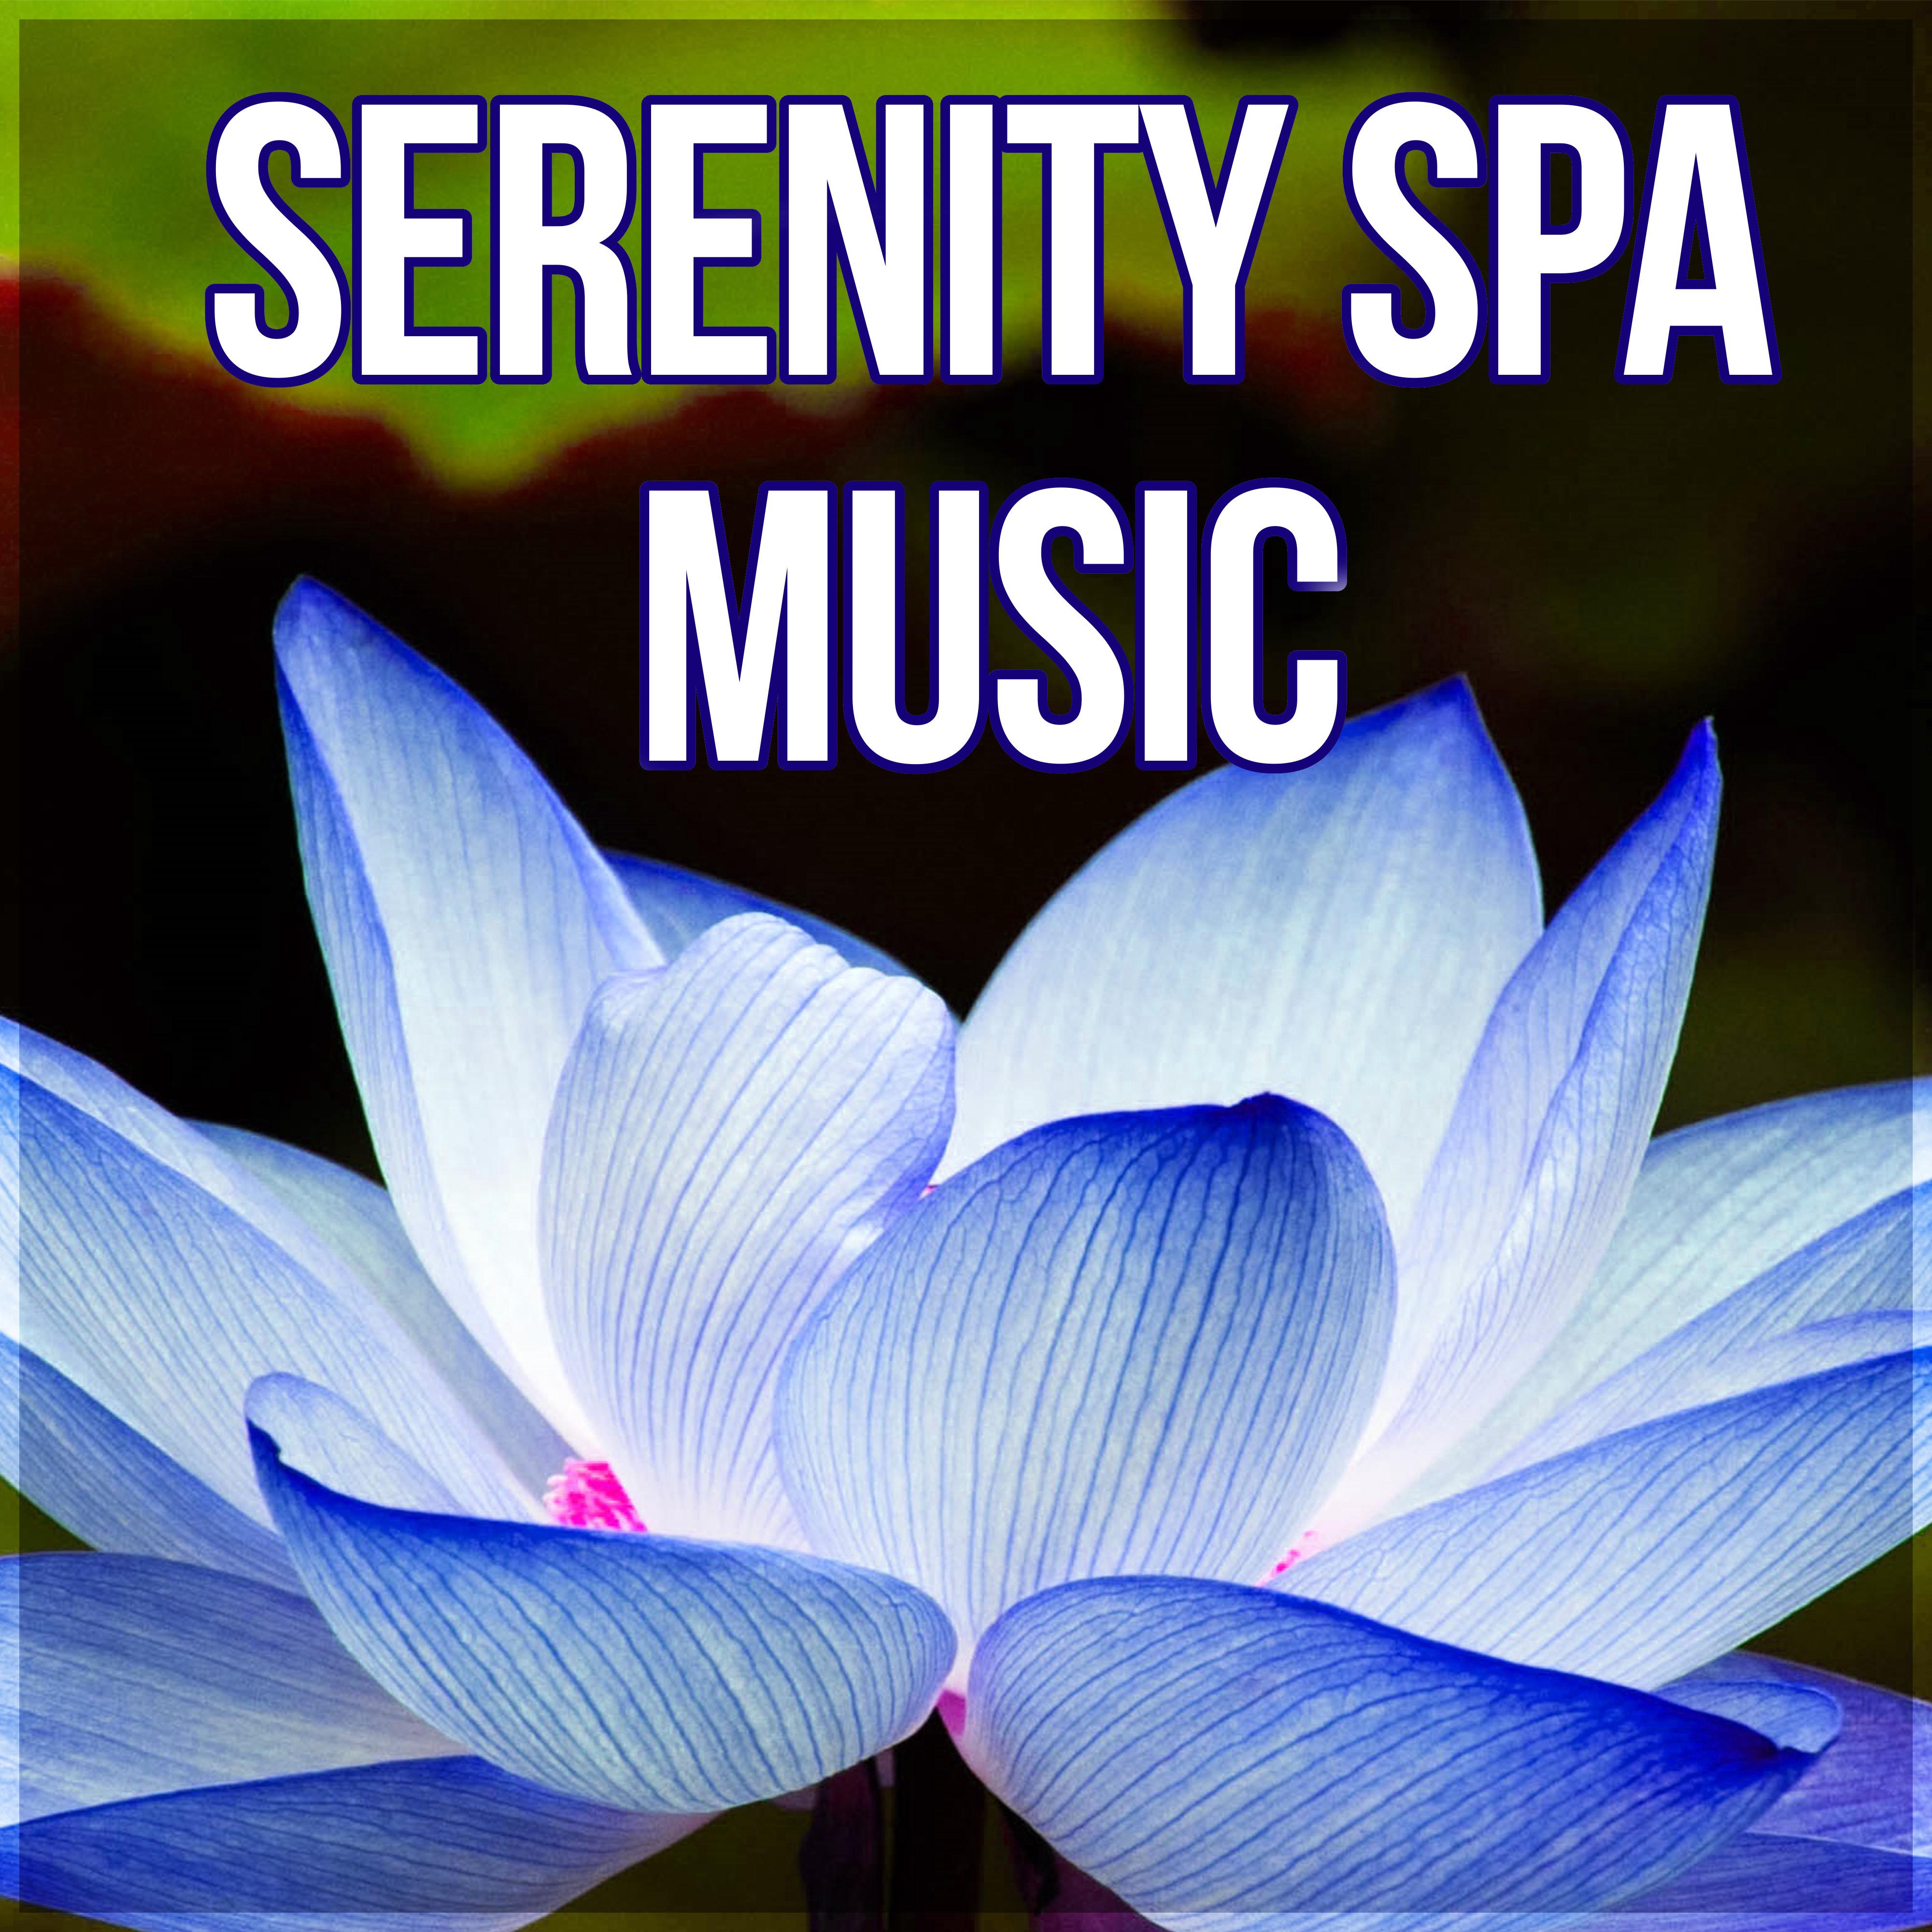 Serenity Spa Music - Wellness Music Spa, Music and Pure Nature Sounds for Stress Relief, Slow Music for Yoga, Relaxing and Meditation